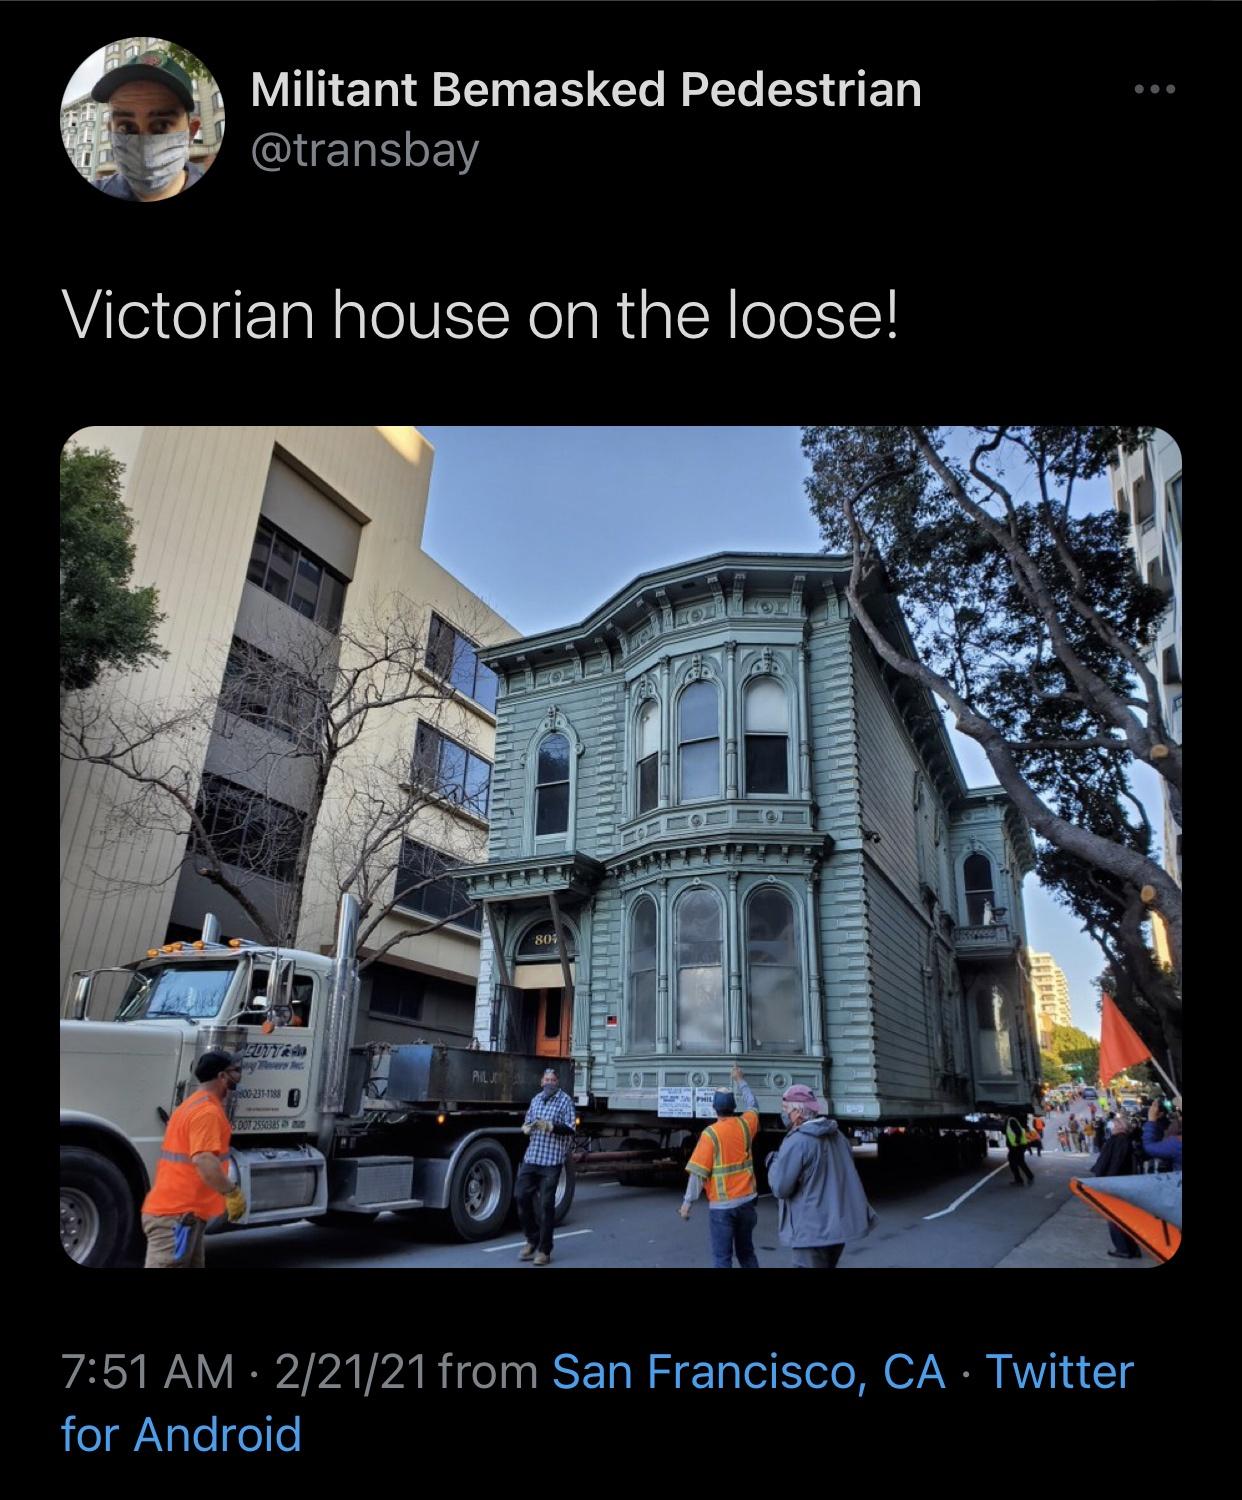 car - Militant Bemasked Pedestrian Victorian house on the loose! 80% Palje 2003 Dots 22121 from San Francisco, Ca Twitter for Android